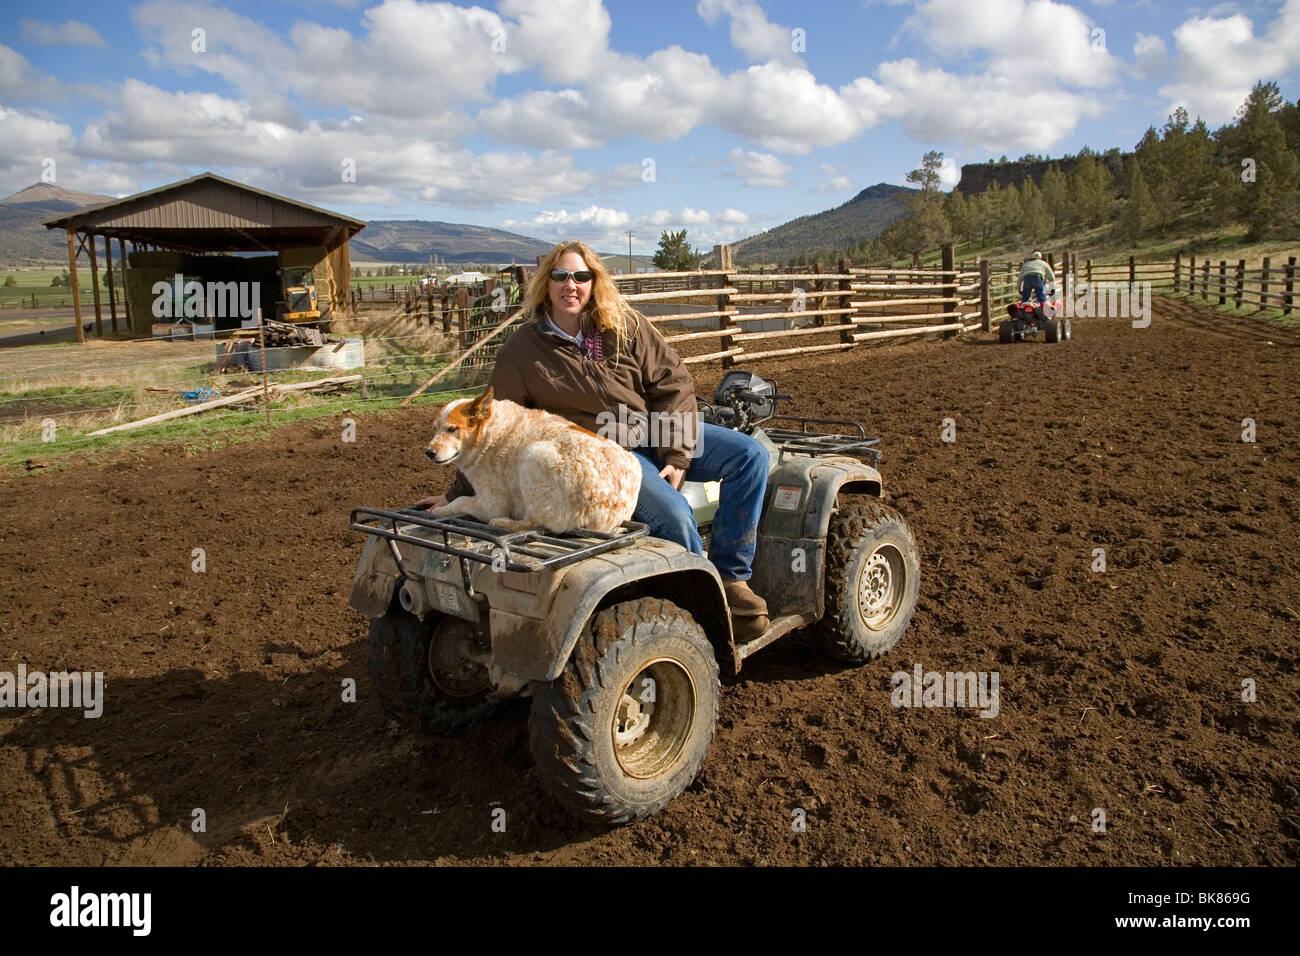 Modern cowboys on ATVs, All Terrain Vehicles, rounds up a herd of cattle for branding on a large cattle ranch in central Oregon Stock Photo